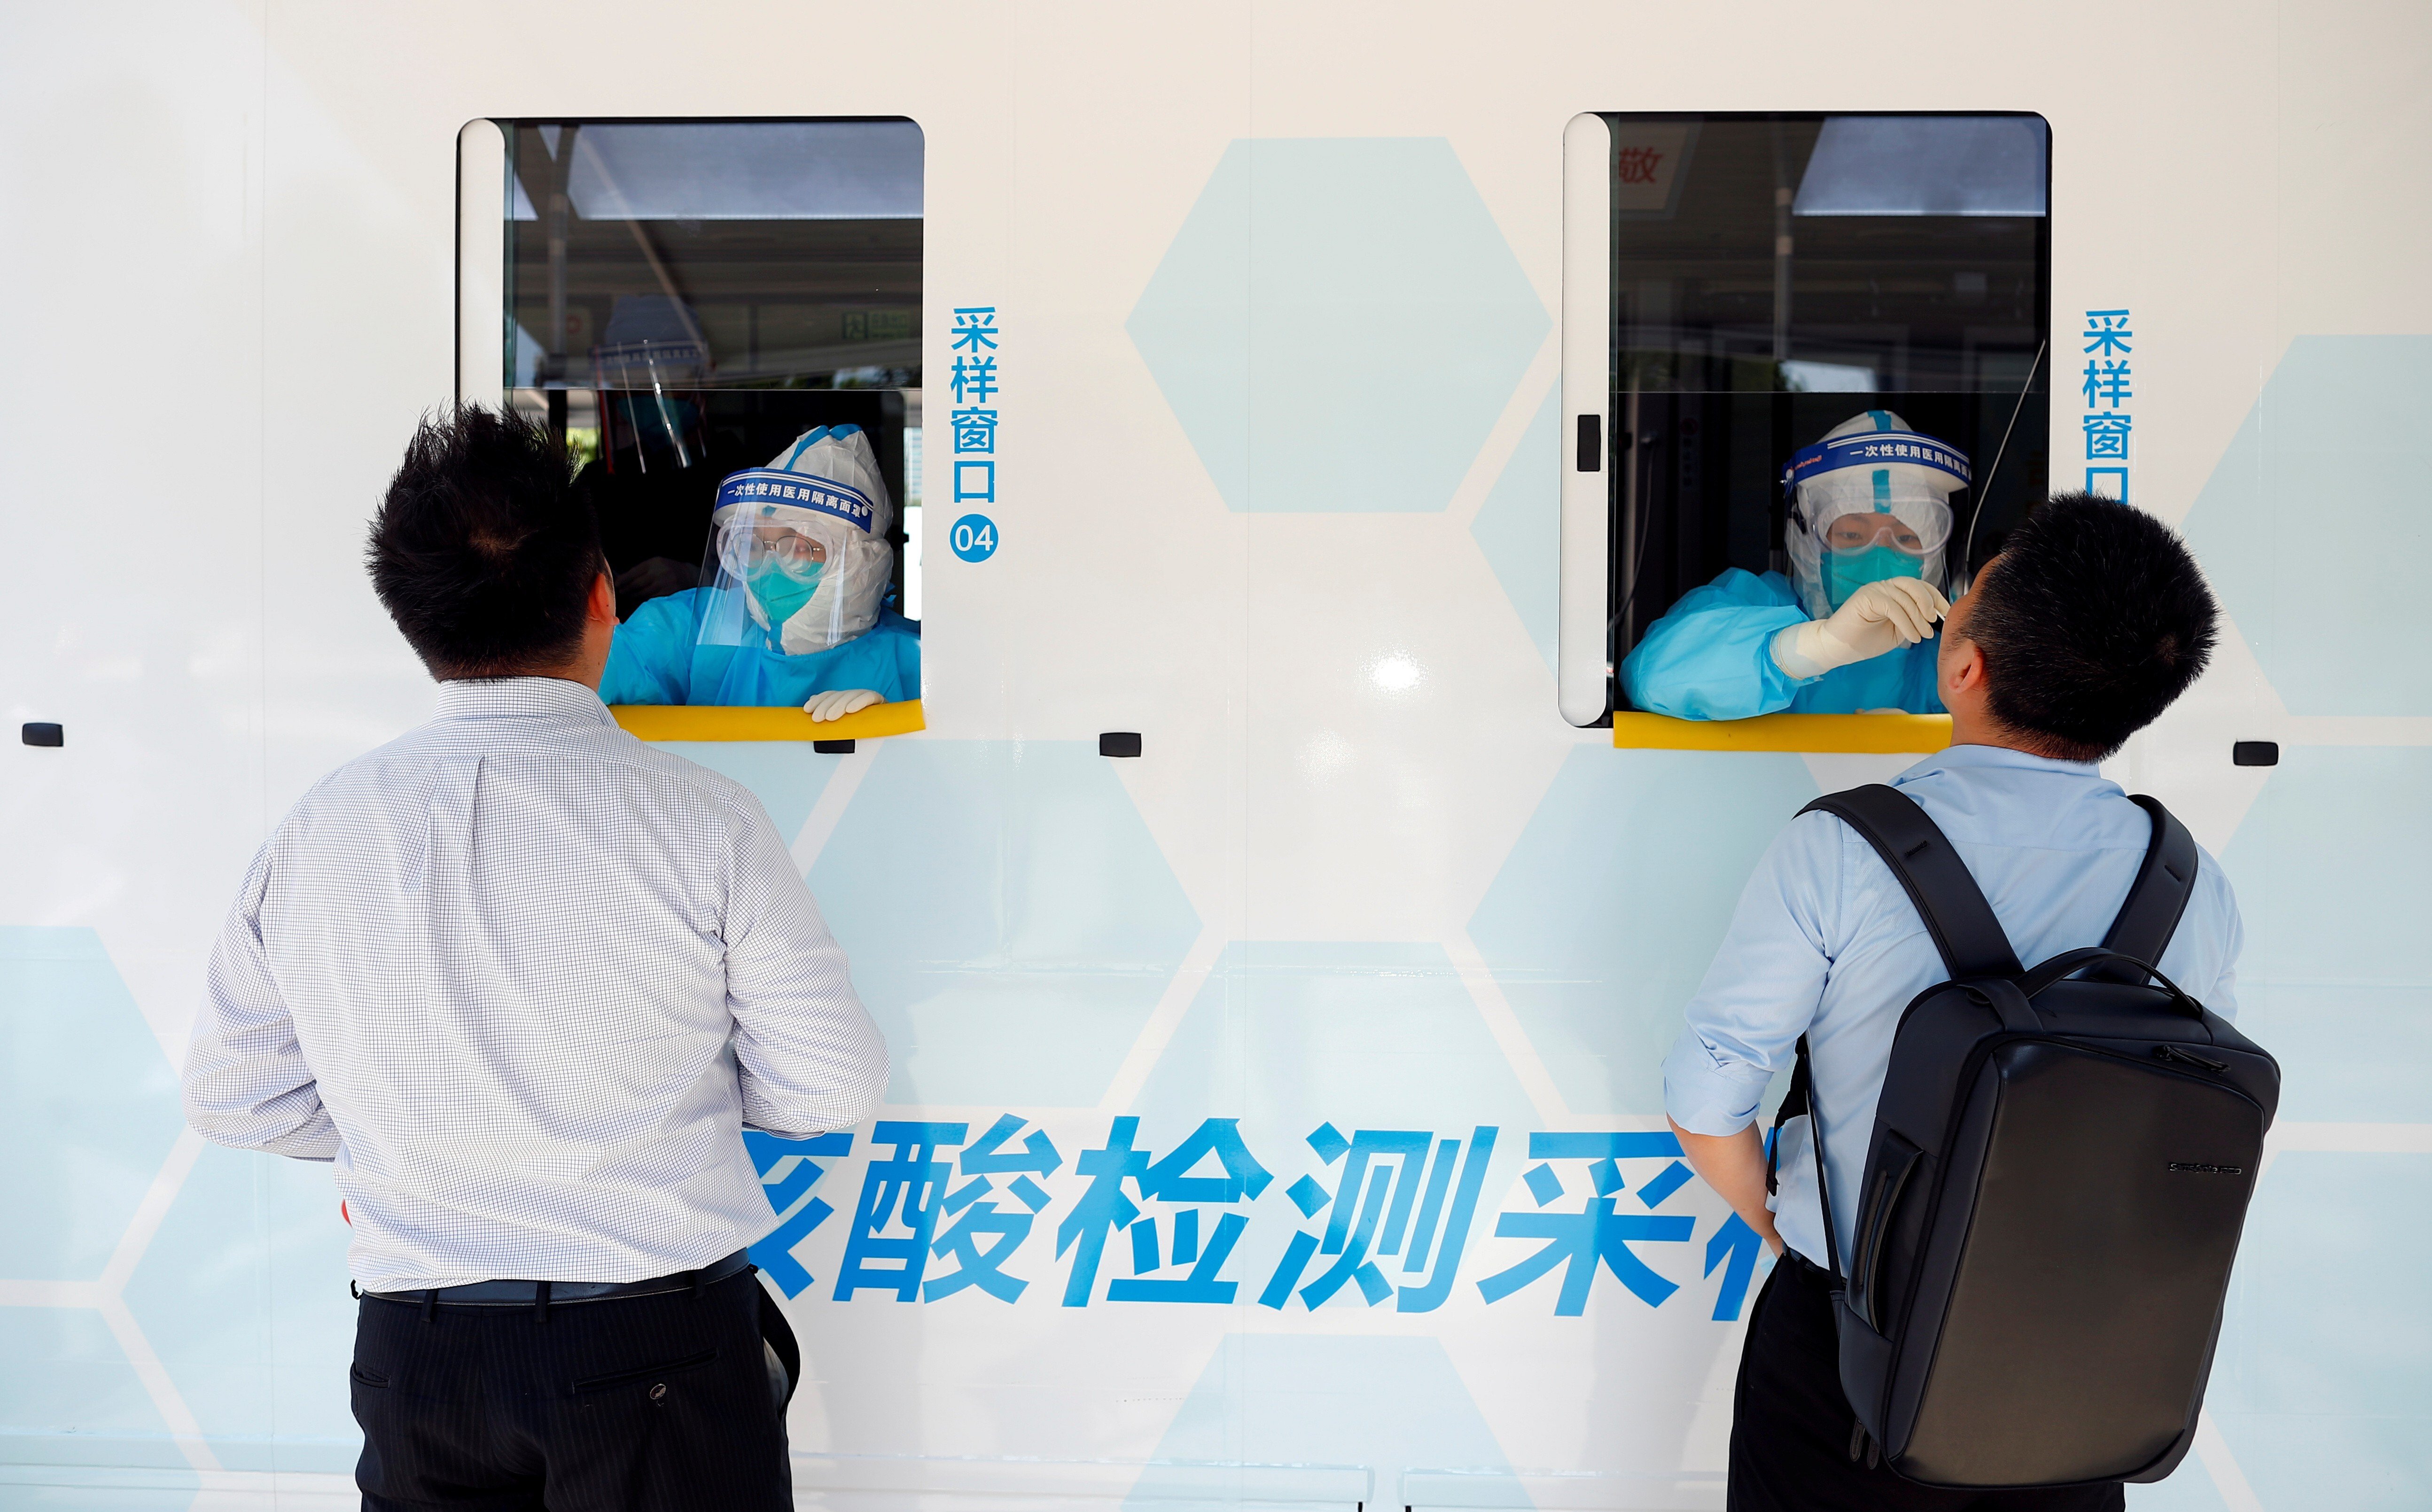 Two people are tested at the windows of a testing vehicle in Beijing on June 30. The success of group testing methods in containing Covid-19 outbreaks in Wuhan and Beijing suggest it might be a useful approach for Hong Kong given the city’s constrained testing capacity. Photo: Reuters